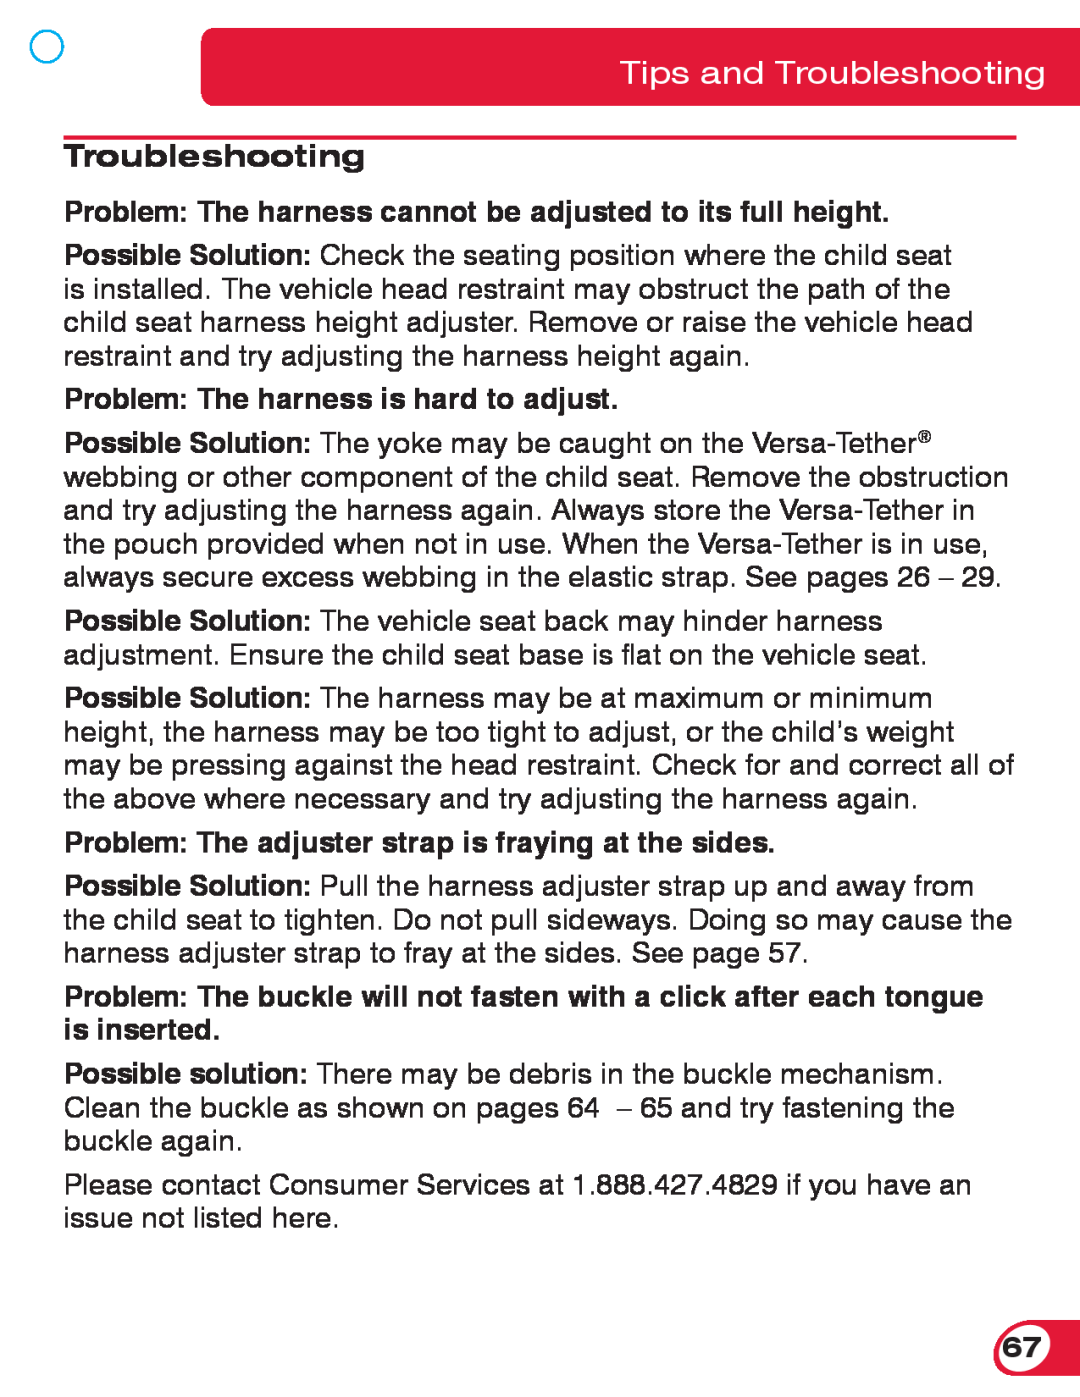 Britax 70 CS manual Tips and Troubleshooting, Problem The harness cannot be adjusted to its full height 